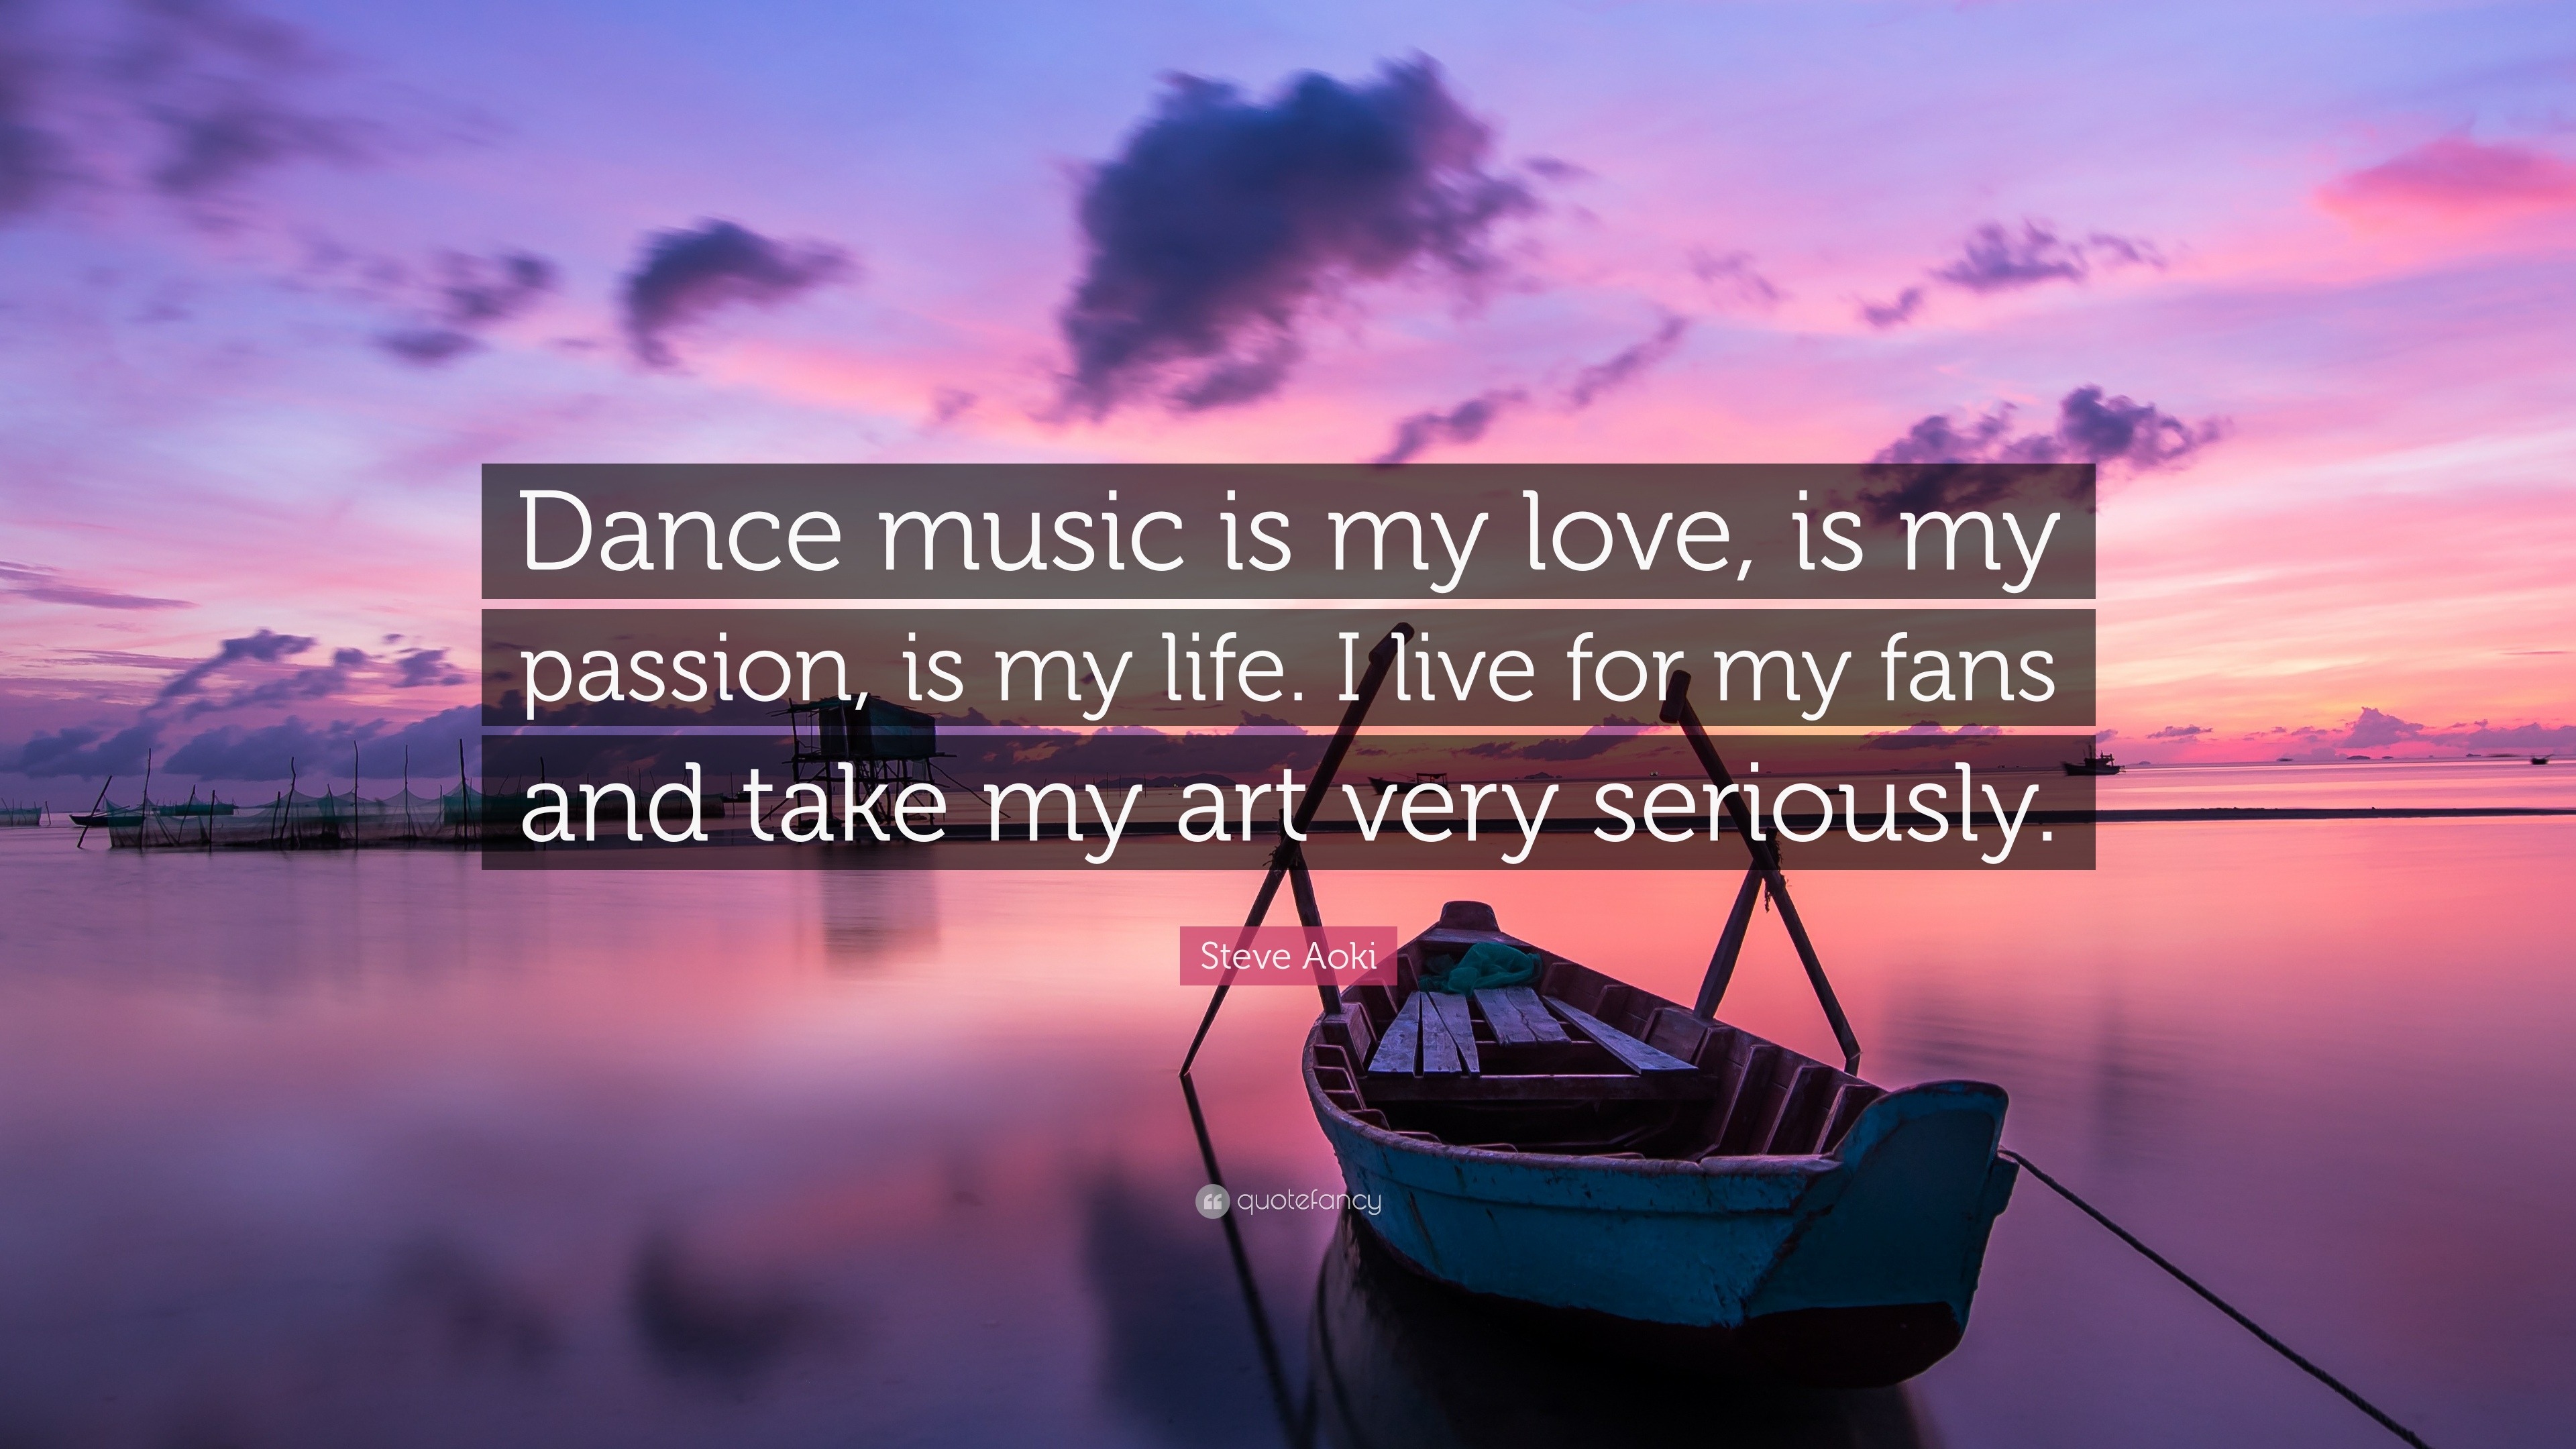 dance is my passion wallpaper